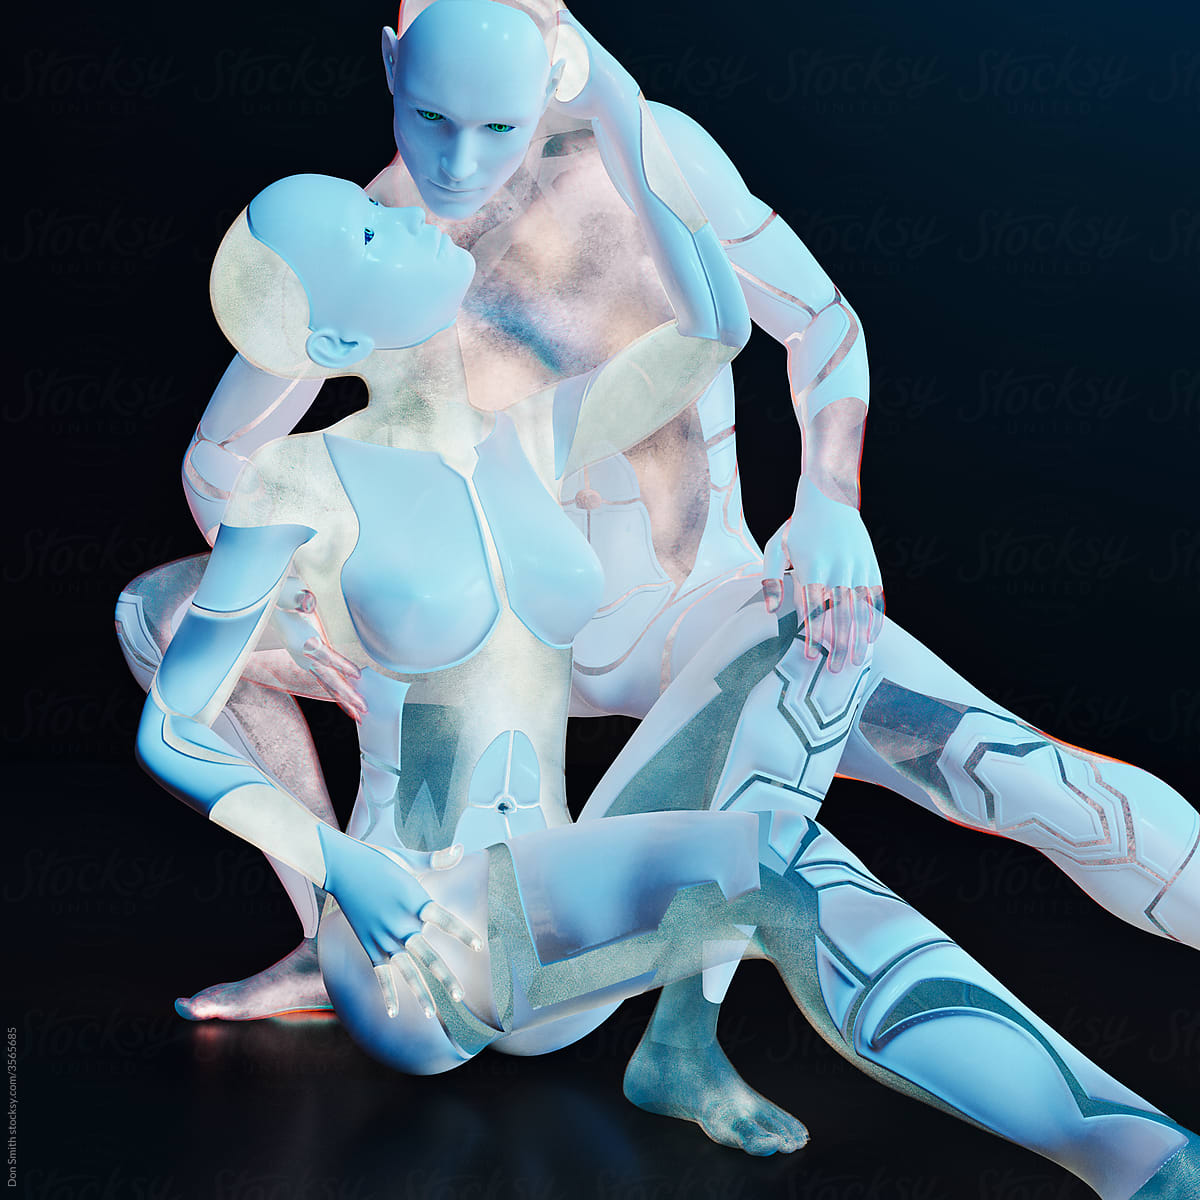 Togetherness: male and female glowing cyborgs